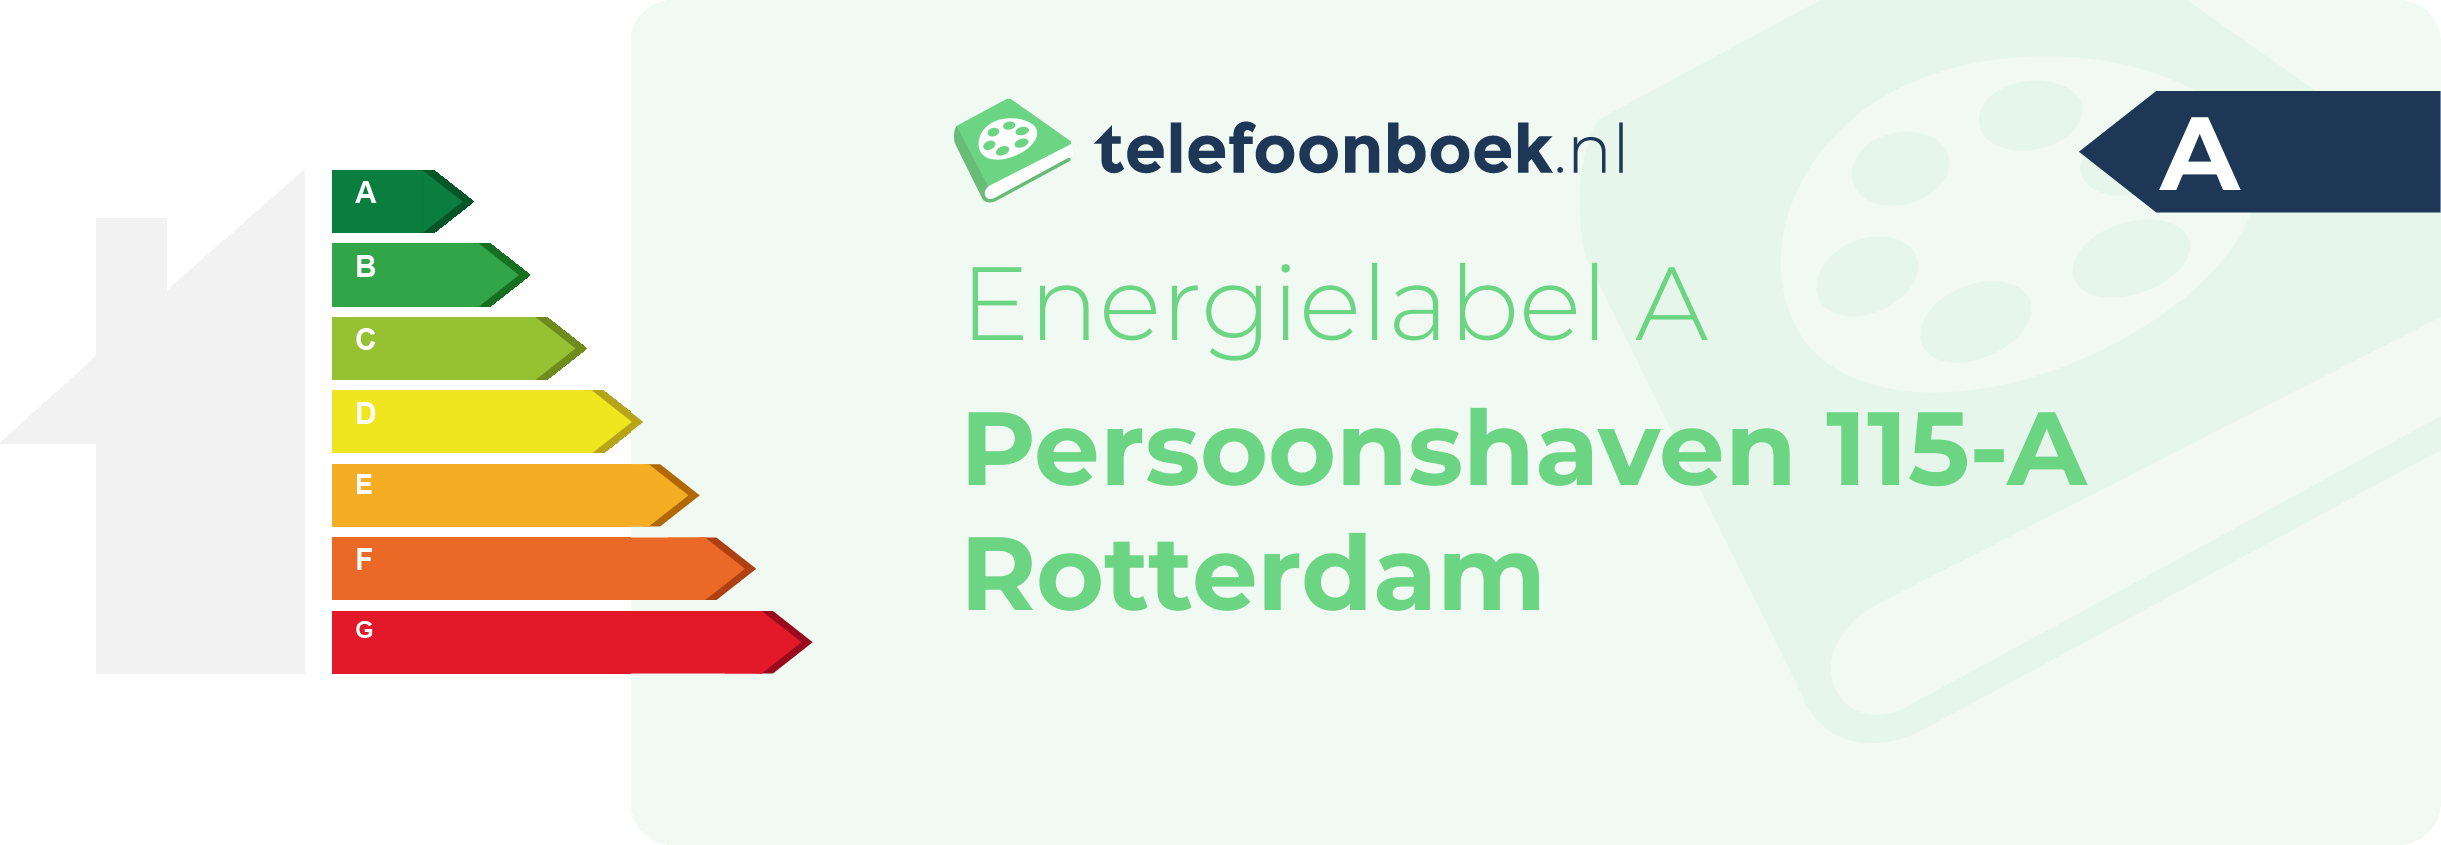 Energielabel Persoonshaven 115-A Rotterdam